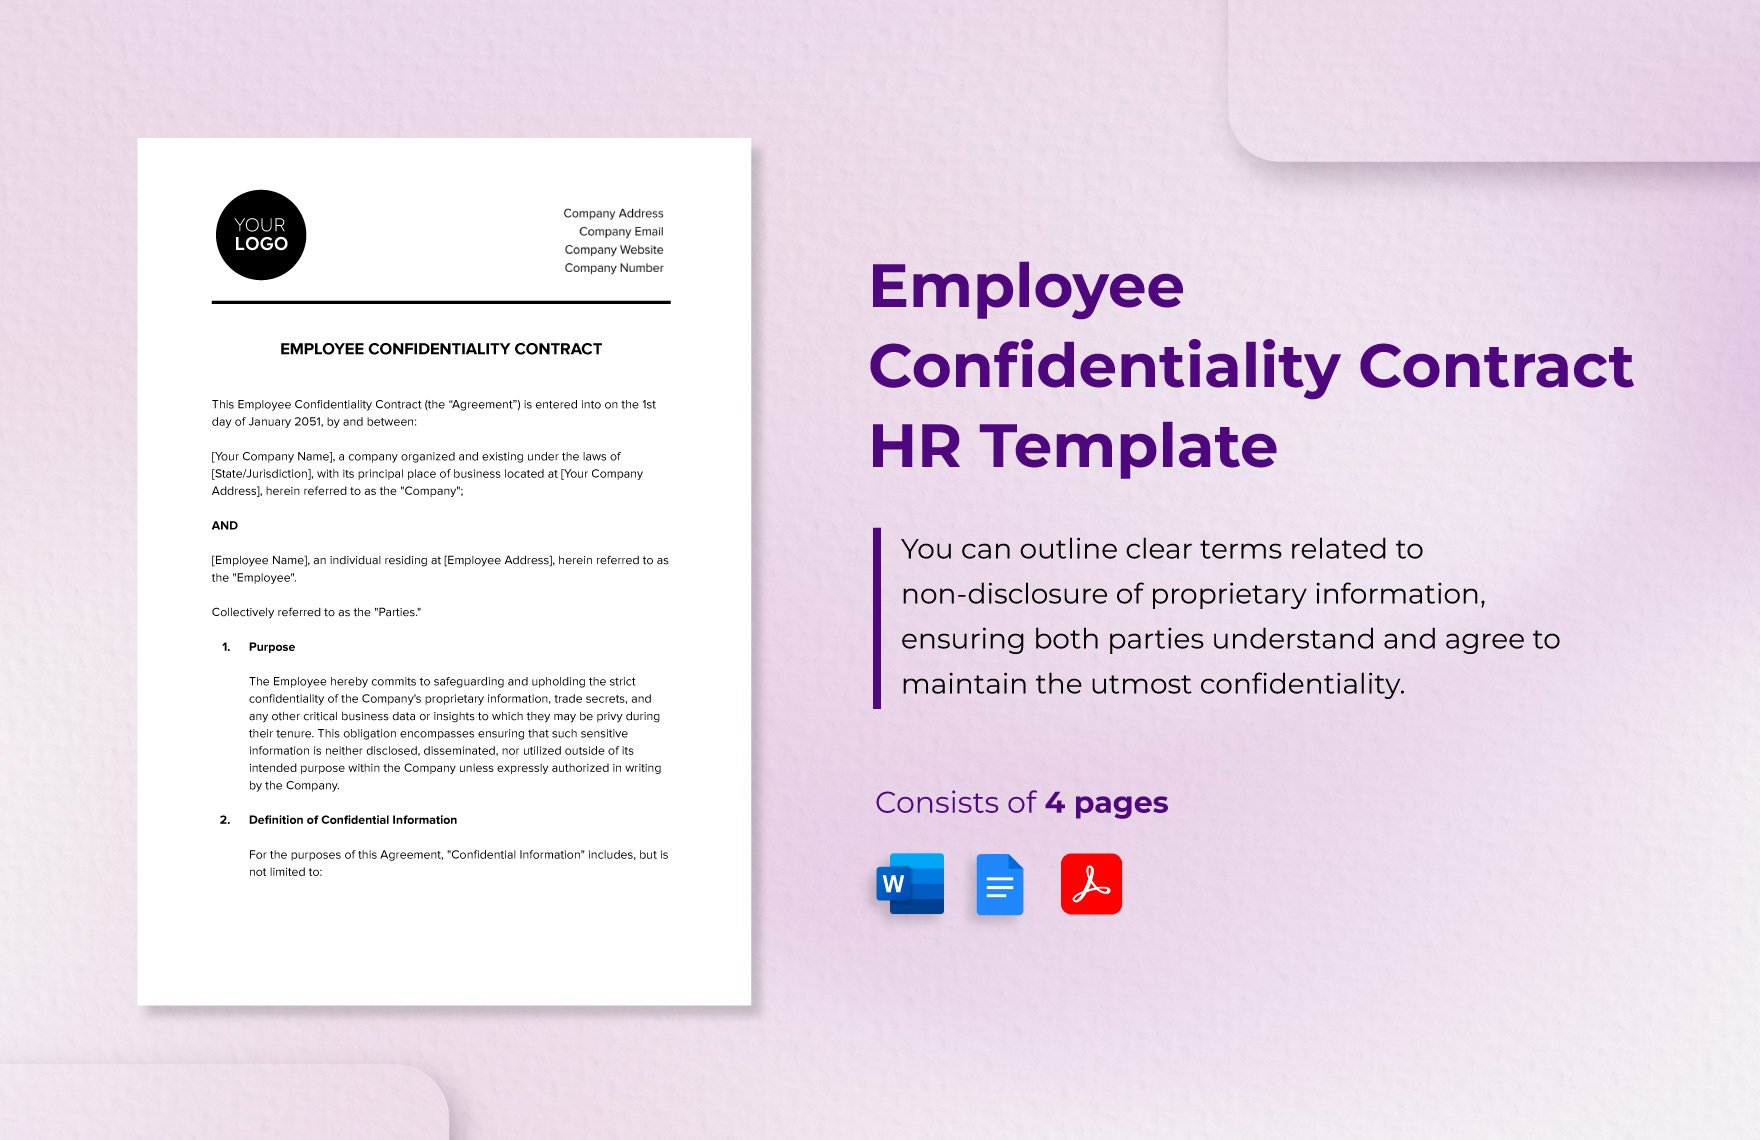 Employee Confidentiality Contract HR Template in Word, Google Docs, PDF